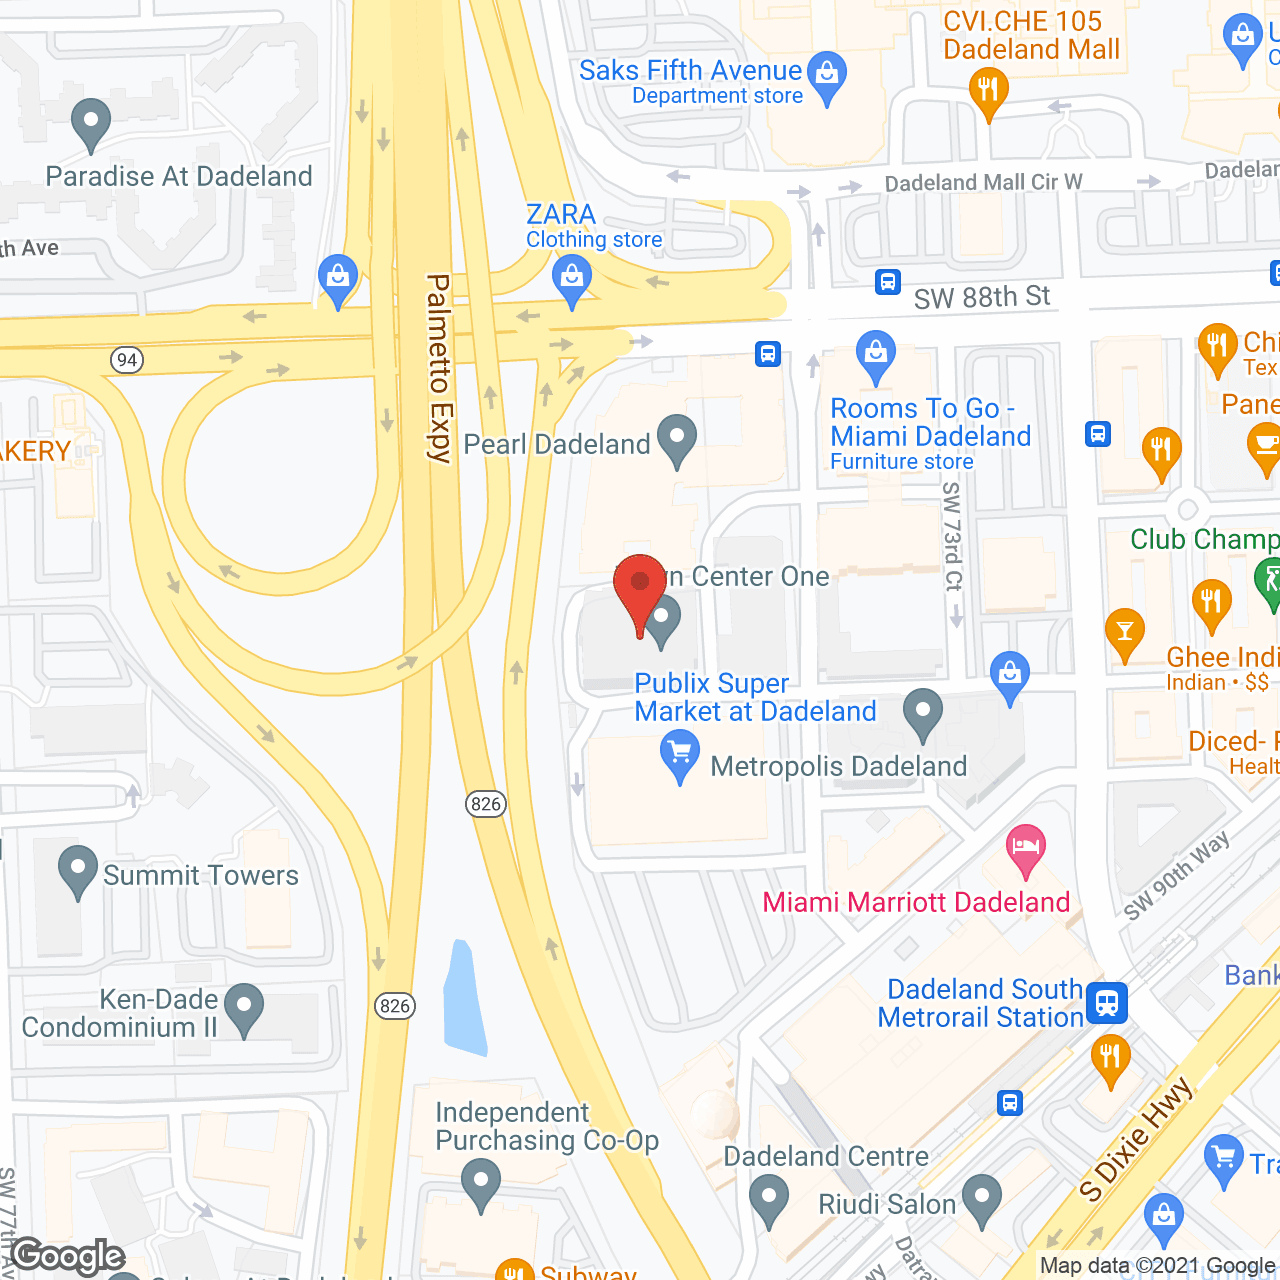 Overture Dadeland (not active) in google map